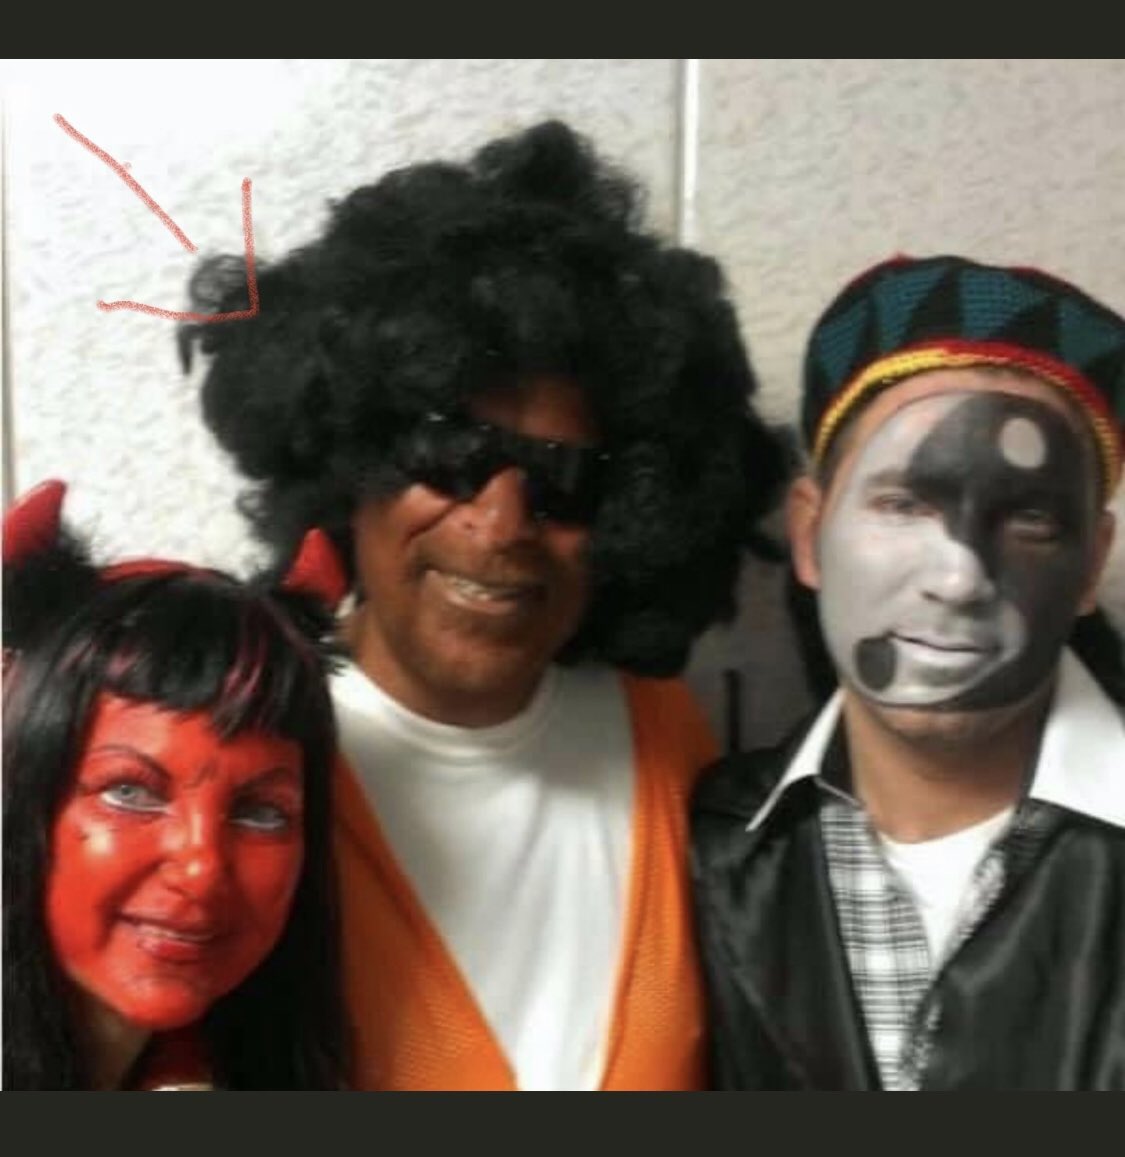 The anti-Black tradition of Blackface has been a strange obsession in this community. From Al Jolsen, to Howard Stern, Dov Hikind, Sarah Silverman, etc #uncomfortableconvo